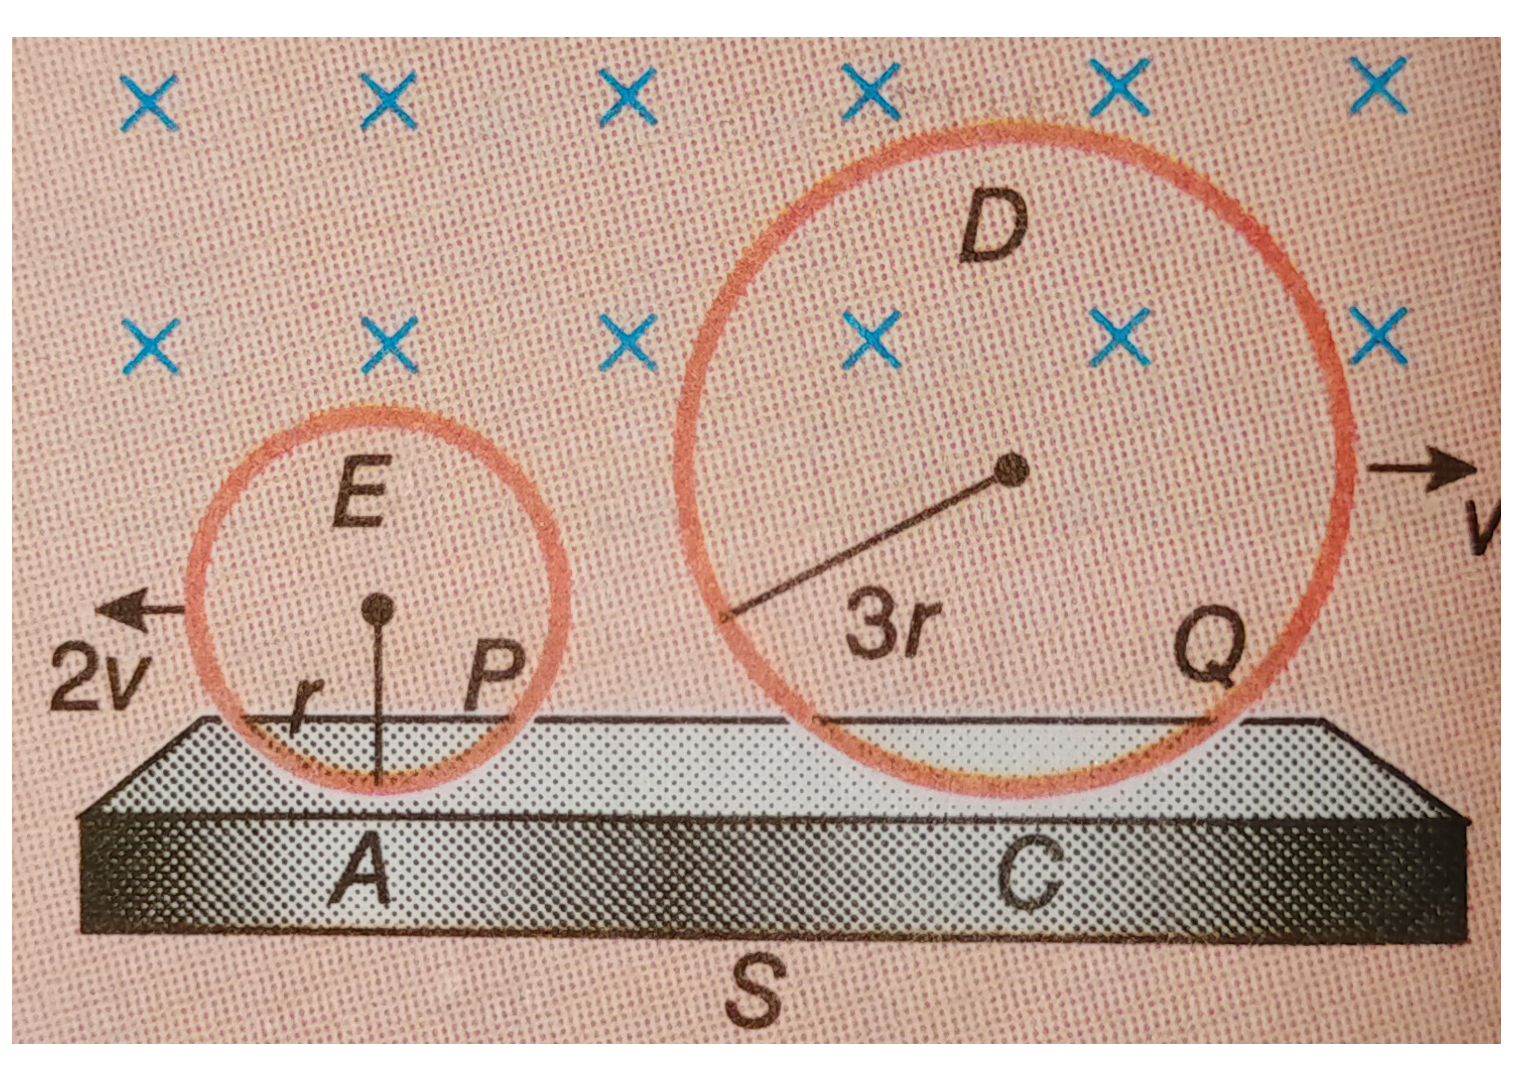 The conducting rings P and Q of radius r and 3r move in opposite directions with velocity 2v and v respectively on a conducting surface S. There is a uniform magnetic field of magnitude B perpendicular to the plane of the rings. What is the potential difference between the highest points of the two rings?